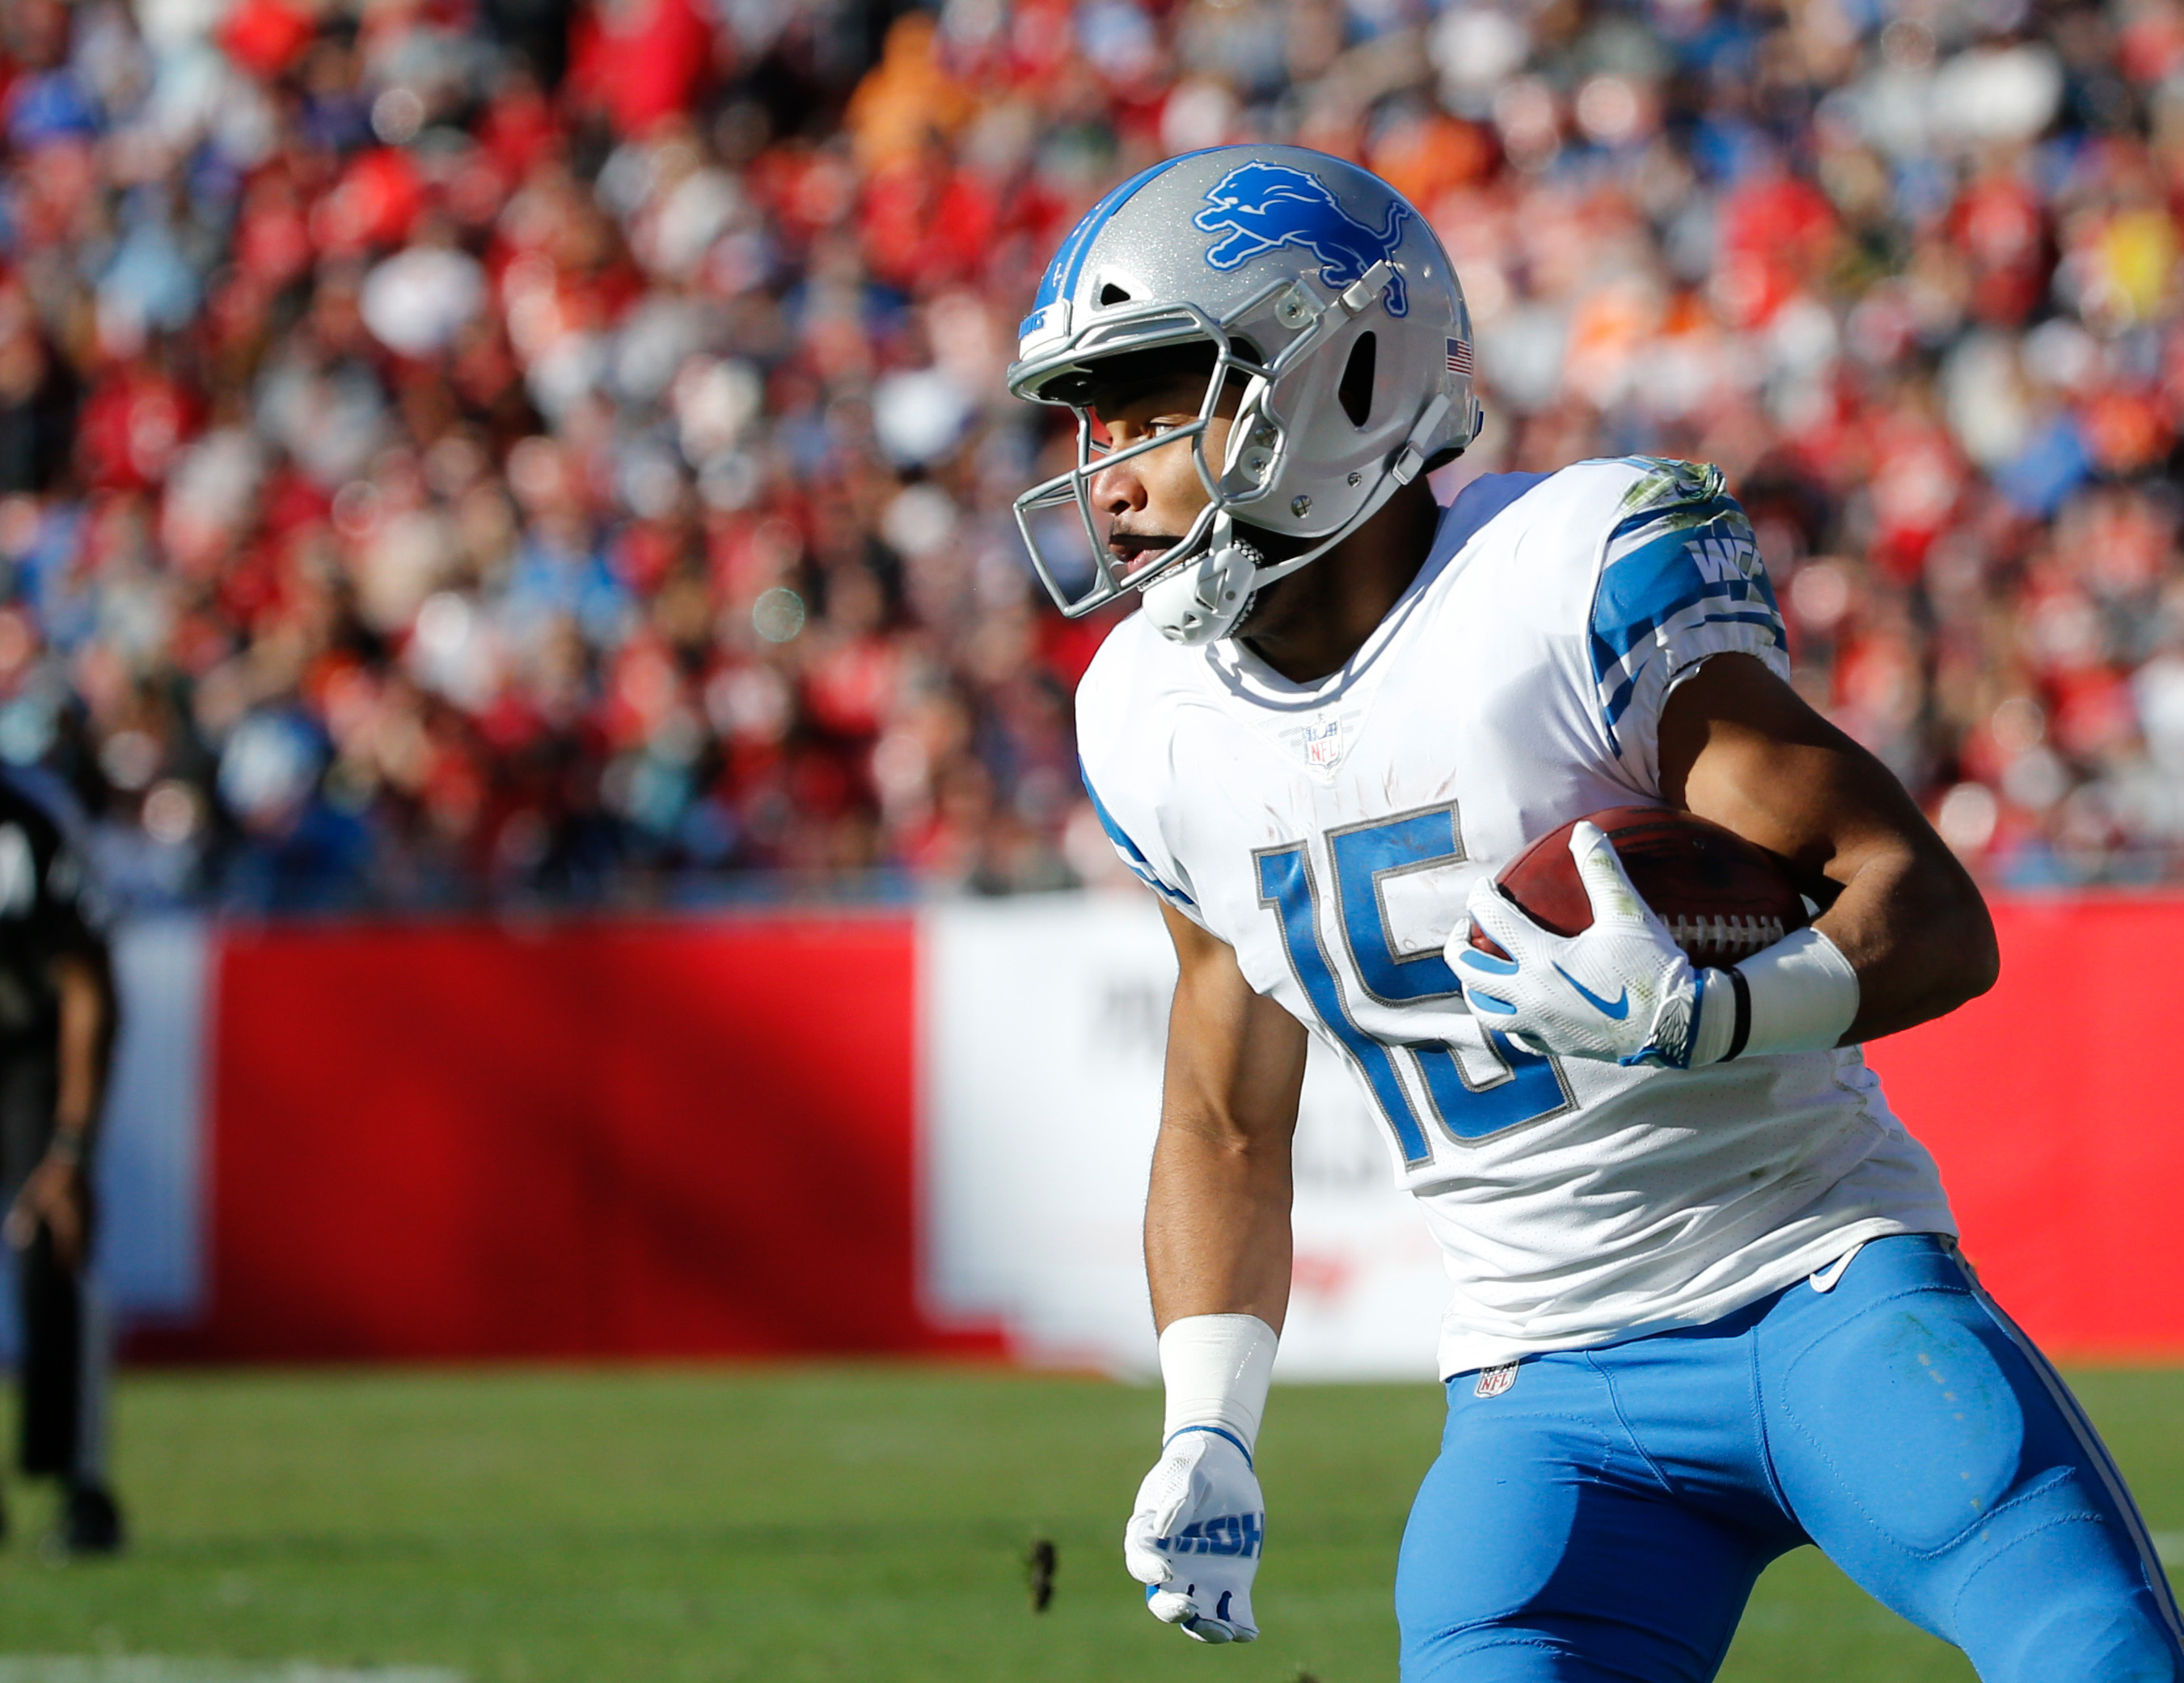 NFL: Detroit Lions at Tampa Bay Buccaneers